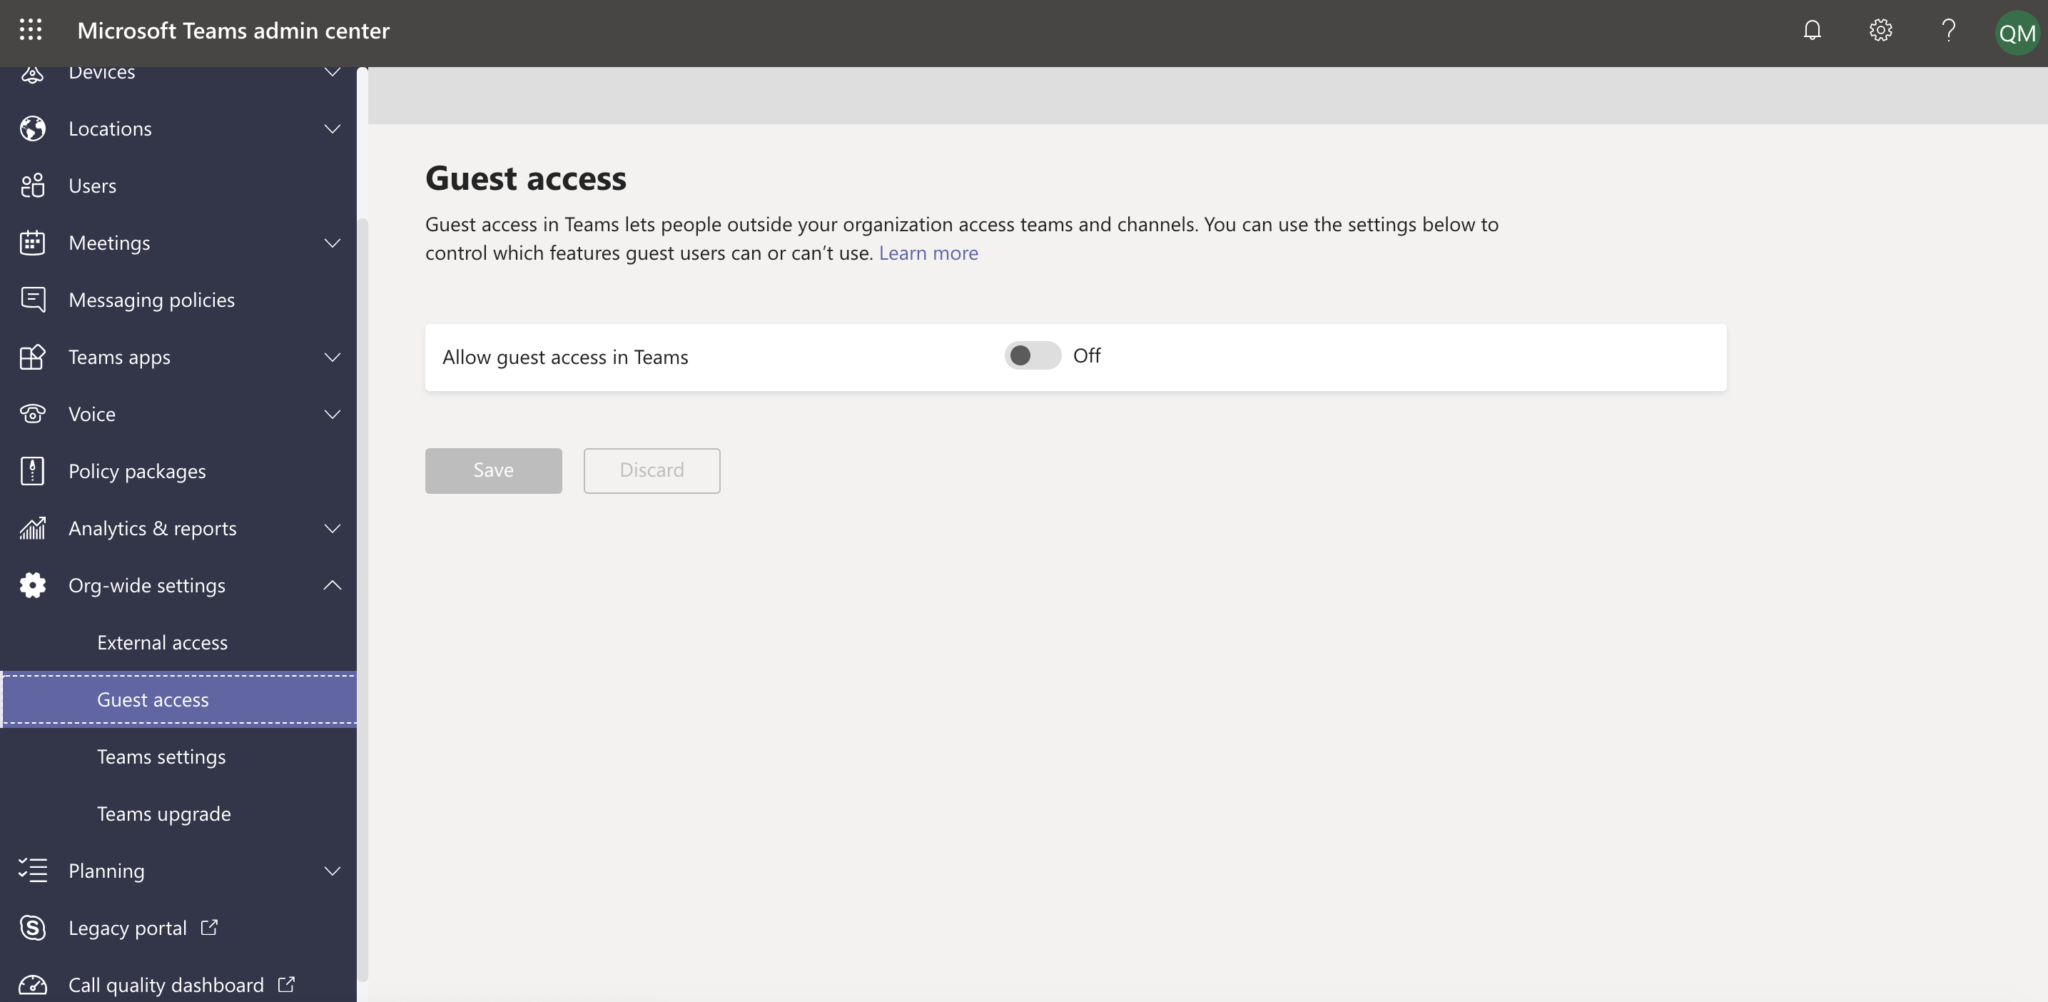 allow guest access in Teams